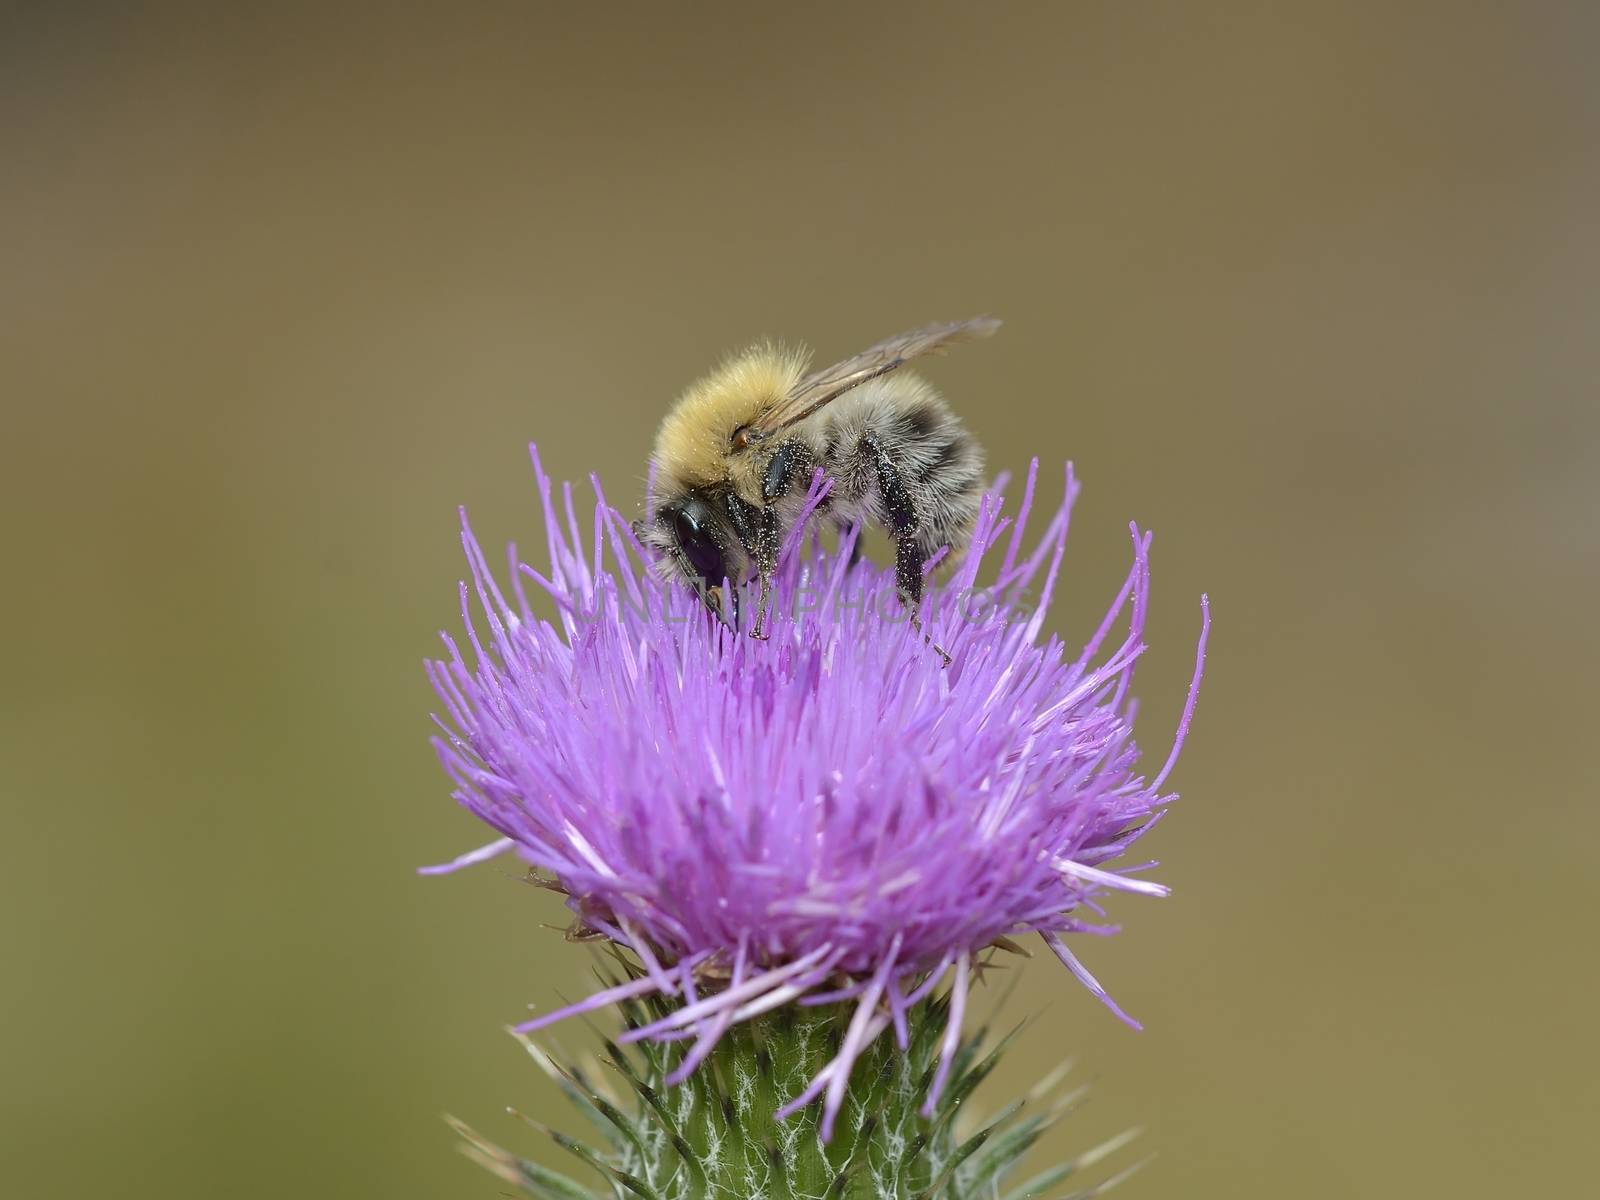 bumblebee on thistle flower by comet